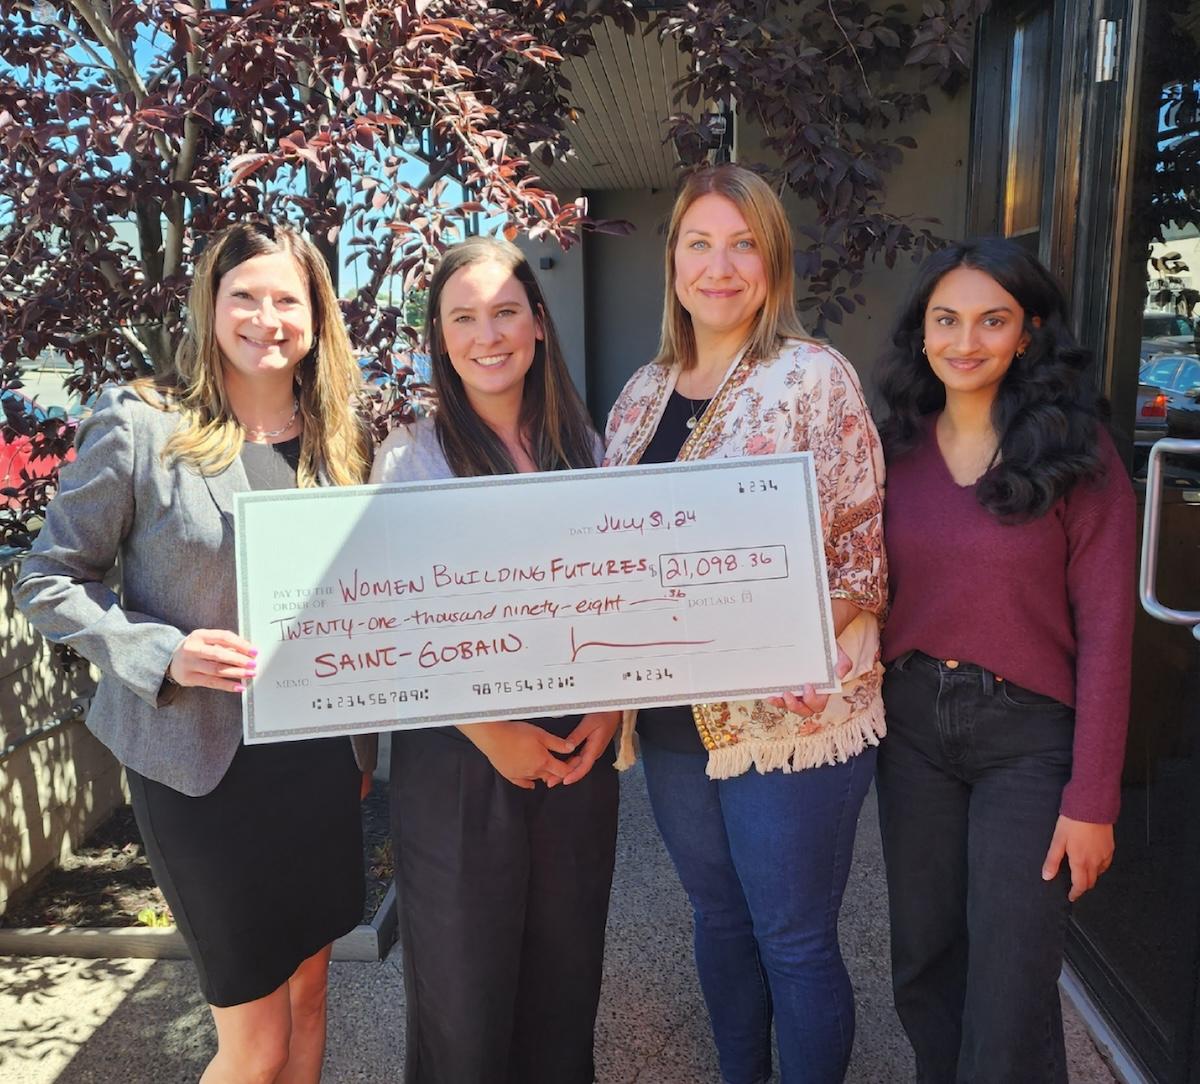 Four women shown holding a grant check from Saint-Gobain for $21,098.